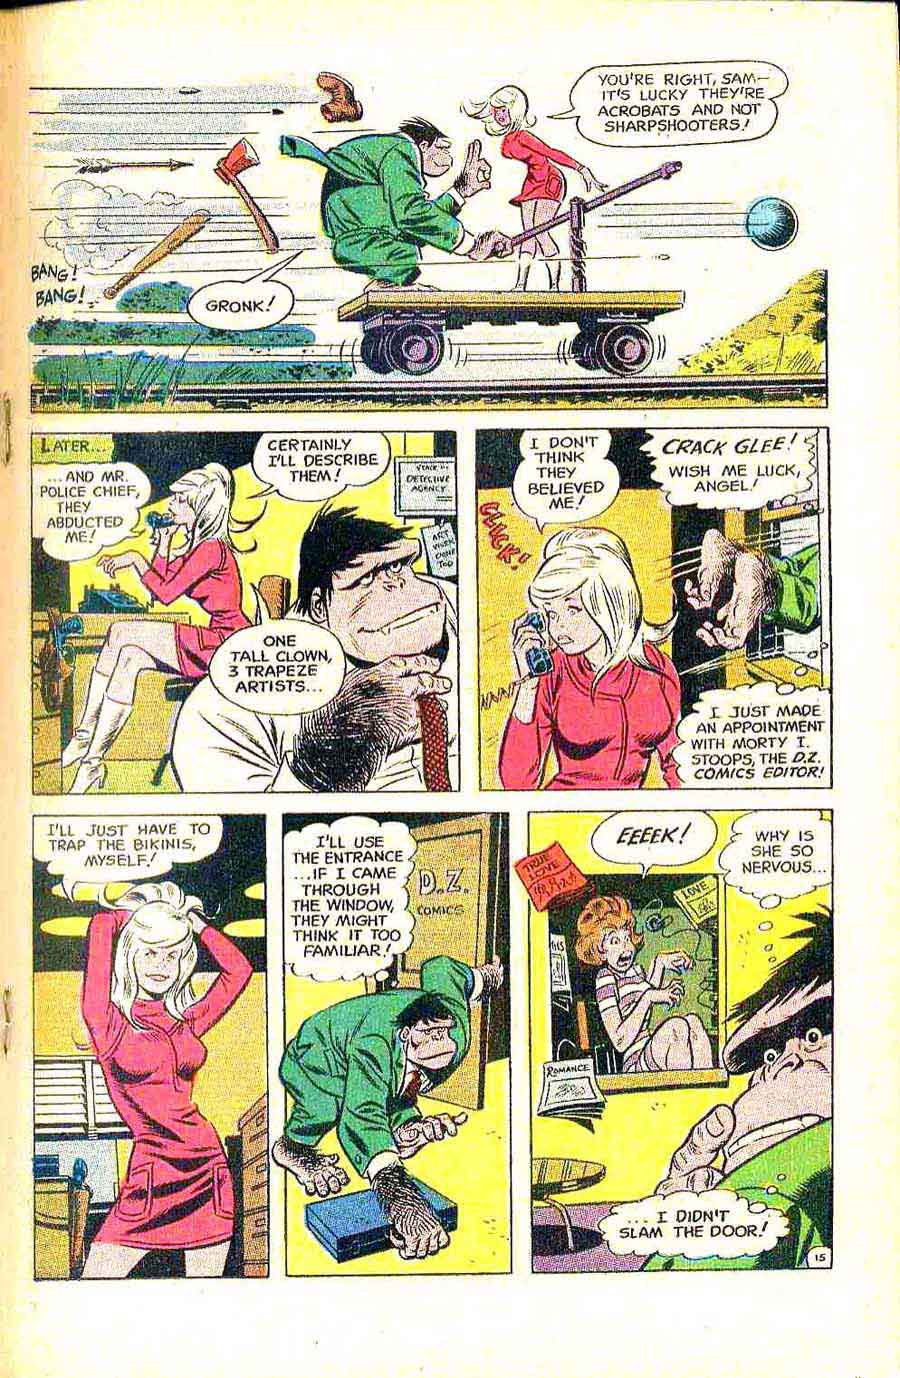 Angel  and the Ape v1 #2 - Wally Wood dc silver age 1960s comic book page art